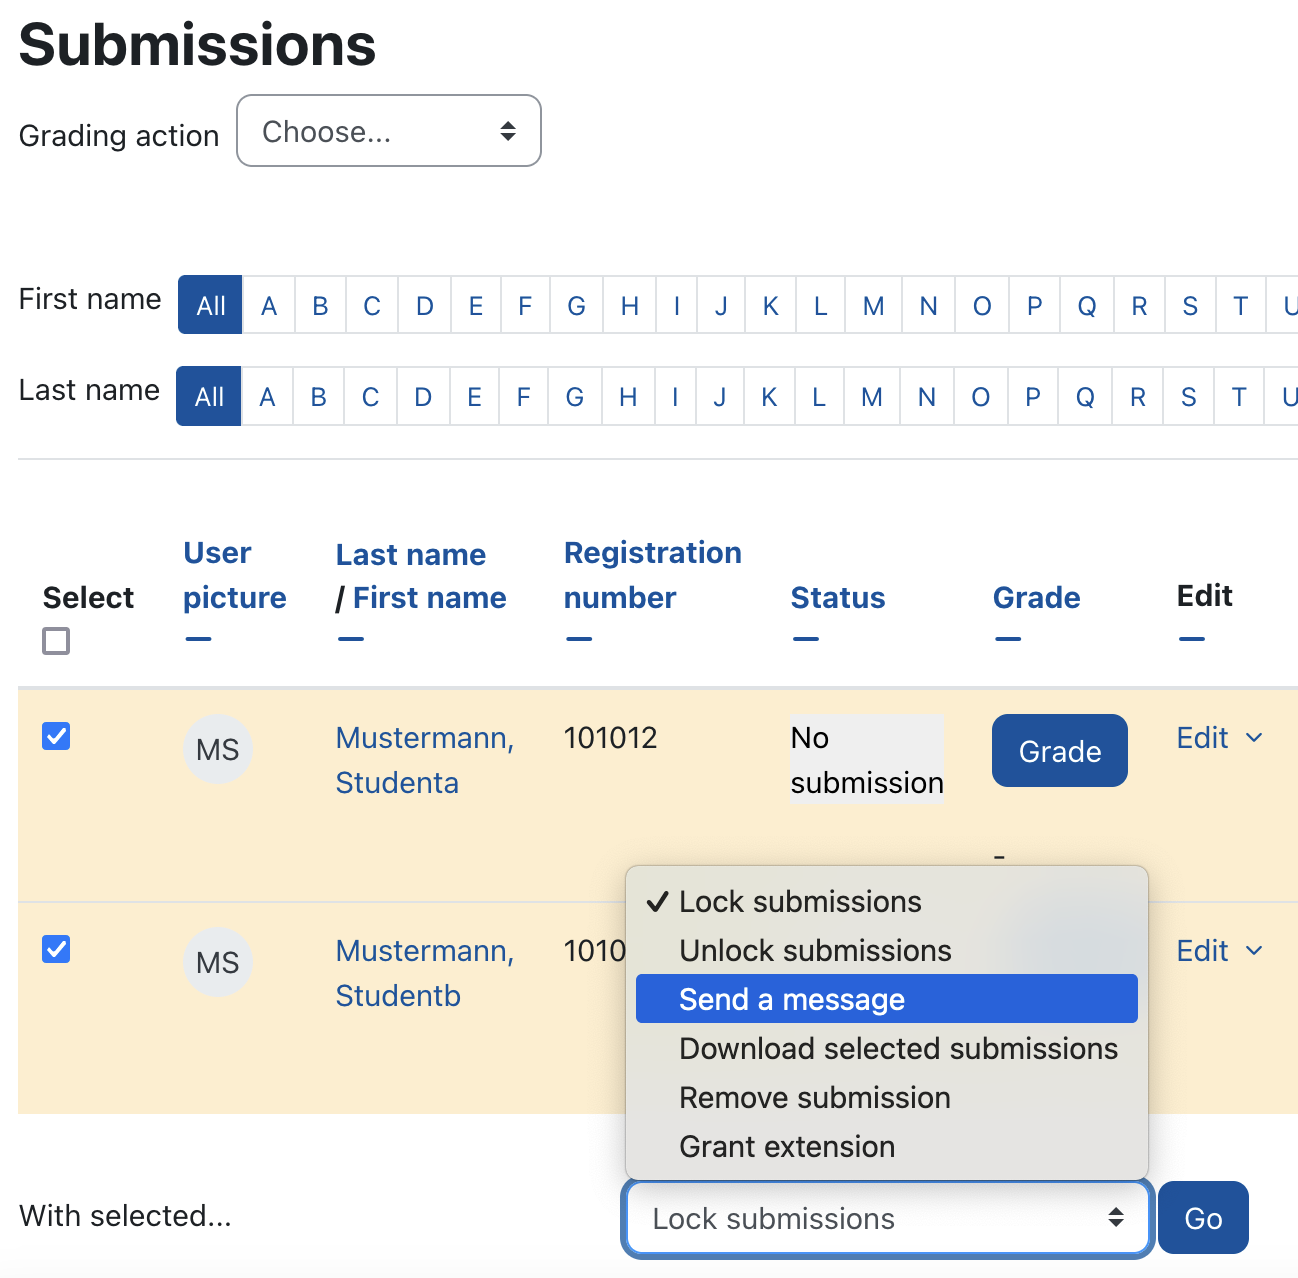 Screenshot of the assignment submission page with two students selected. At the bottom of the page the dropdown action menu "With selected..." is opened and the option "Send message" is chosen